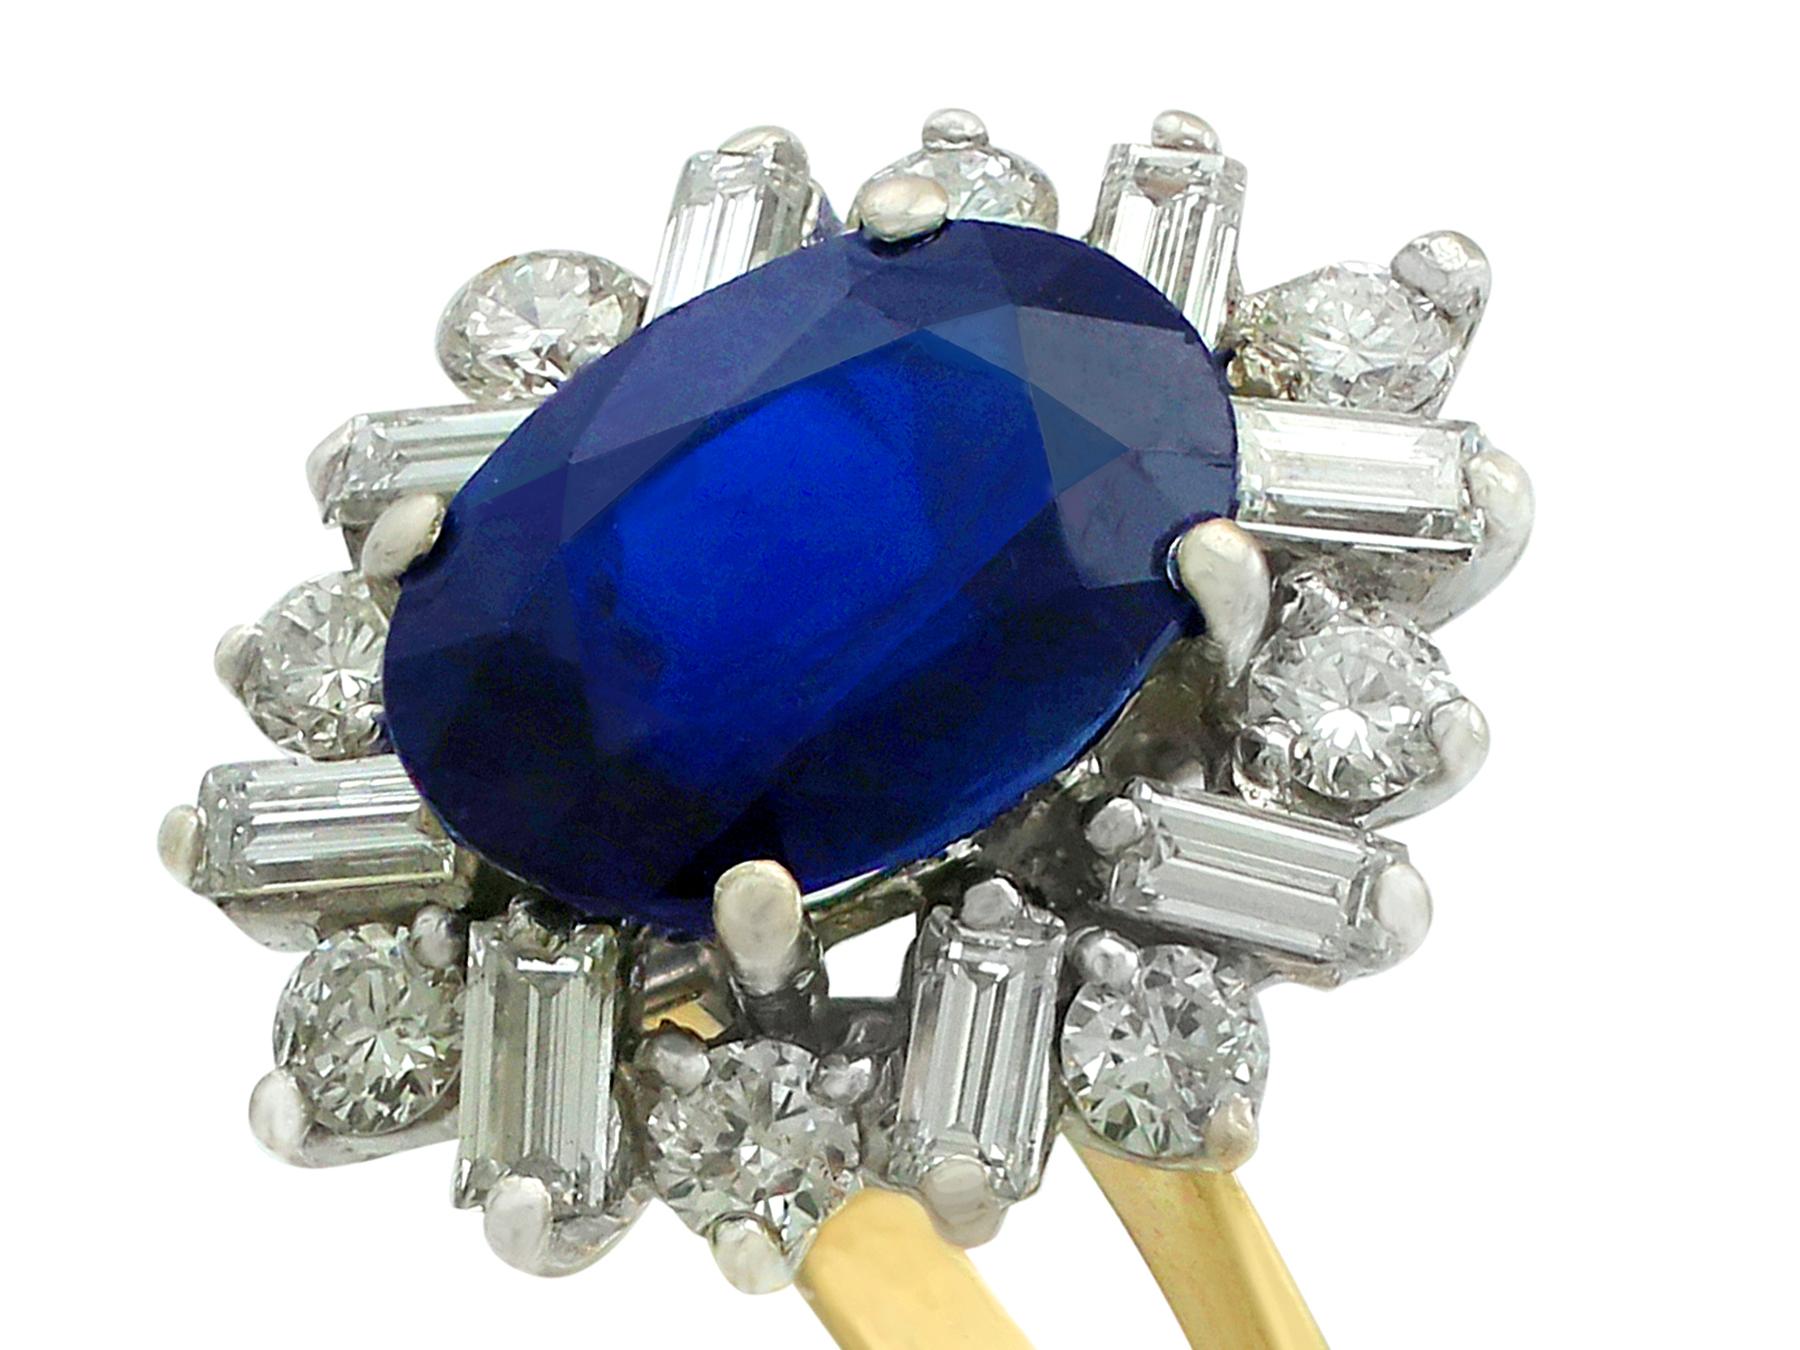 An impressive vintage 2.95 carat sapphire and 0.72 carat diamond, 18 karat yellow and white gold set cluster ring; part of our diverse antique jewellery collections.

This fine and impressive vintage sapphire cluster ring has been crafted in 18k